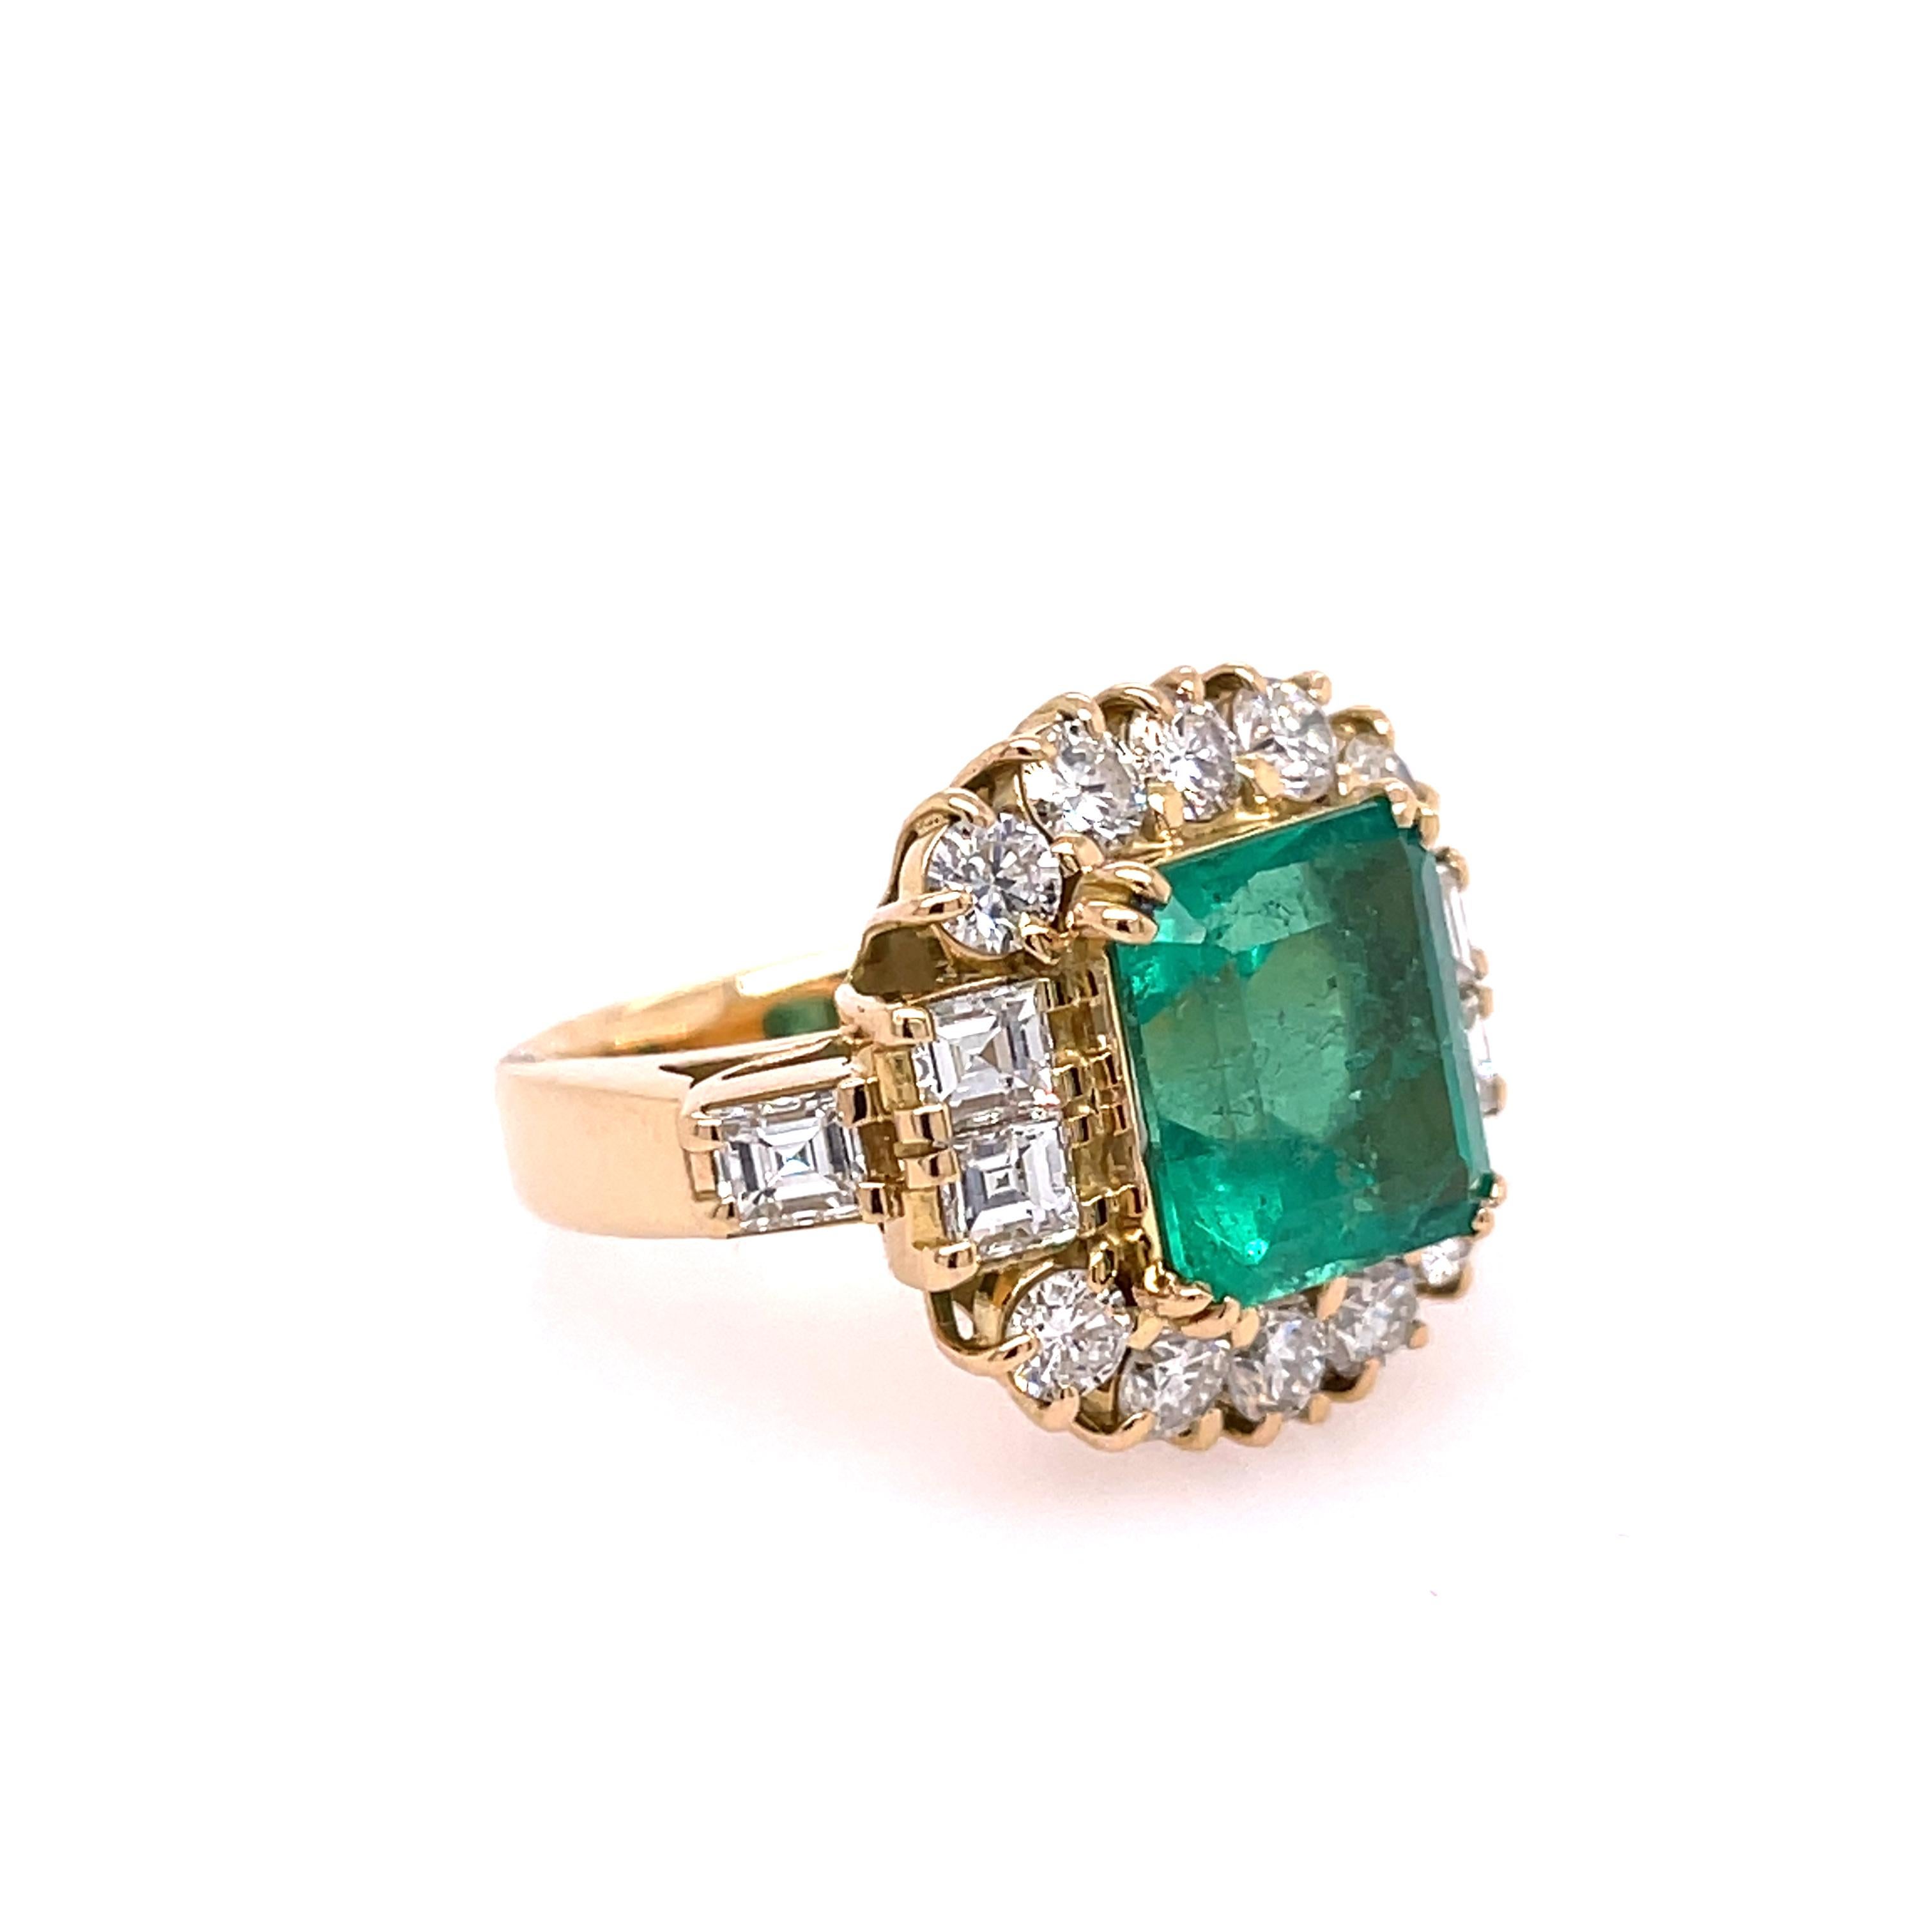 Estate Emerald and Diamond Ring in 18K Yellow Gold. The ring features a 5.03ct emerald and 2.44ctw of diamonds. Ring size 5.50, can be sized. Circa 1970s.

12.6 grams